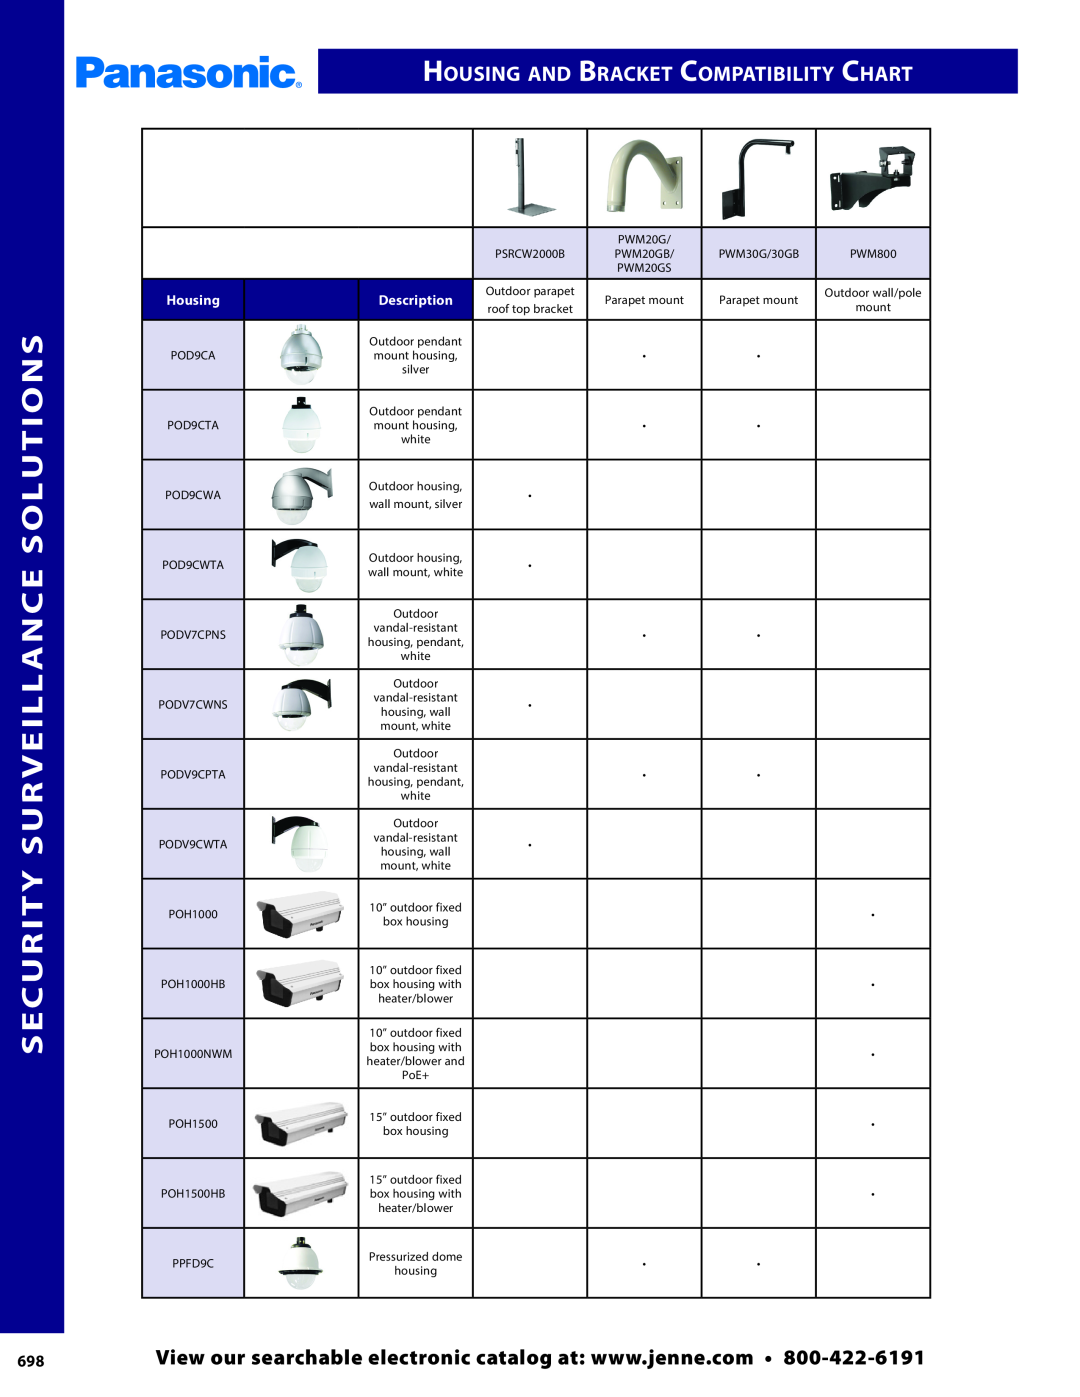 Panasonic PMPU2000 manual Security Surveillance Solutions, Housing and Bracket Compatibility Chart 